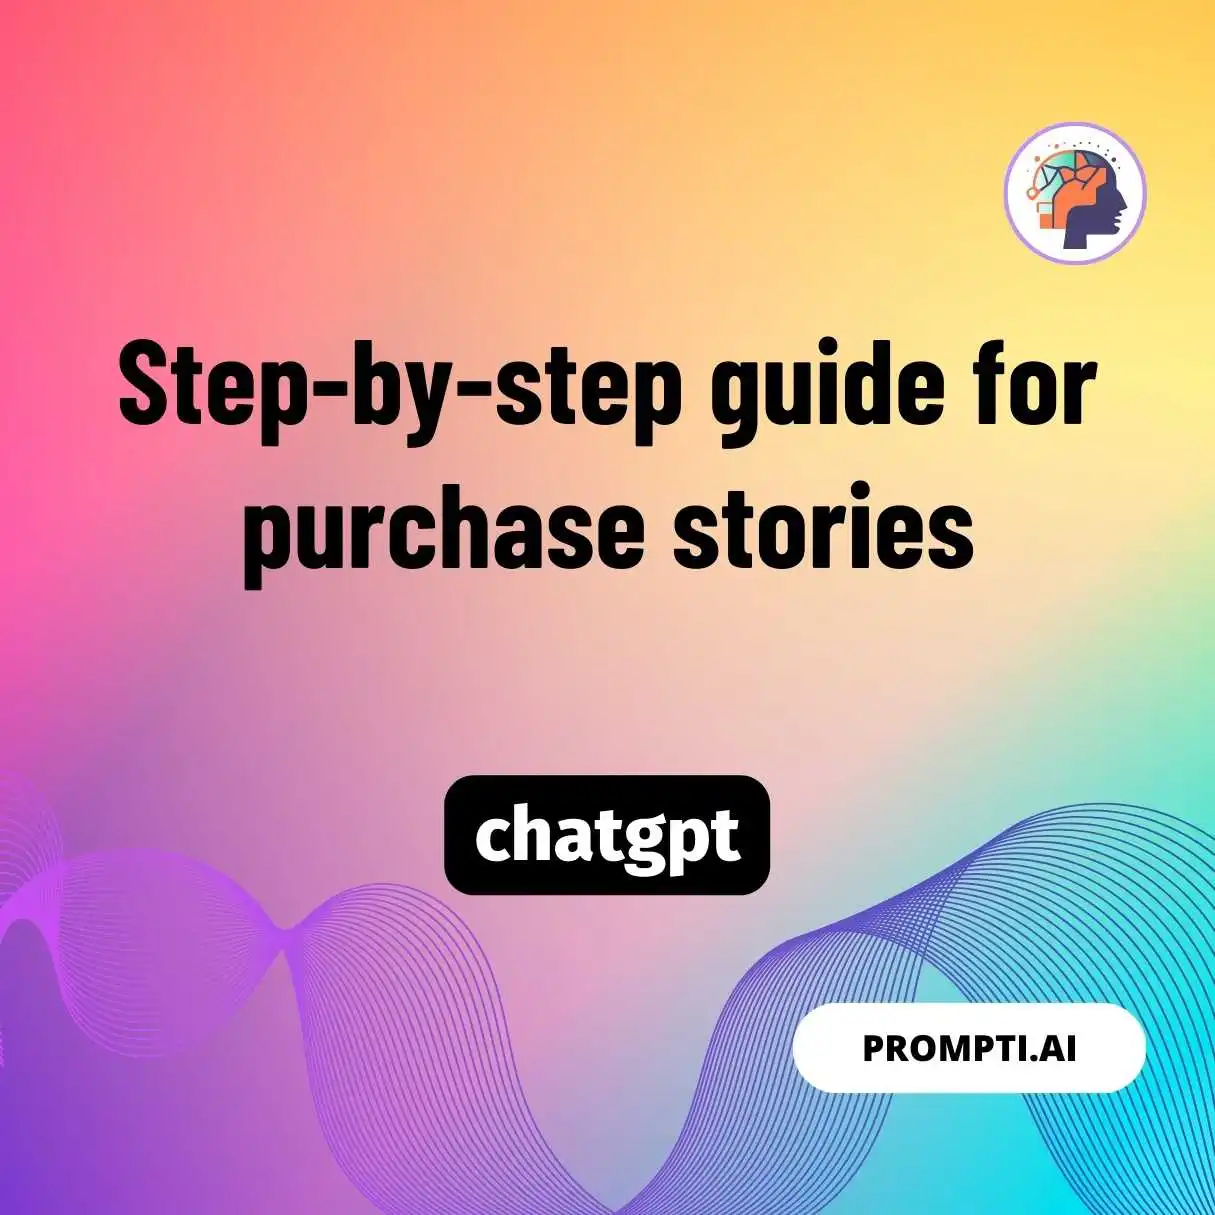 Step-by-step guide for purchase stories